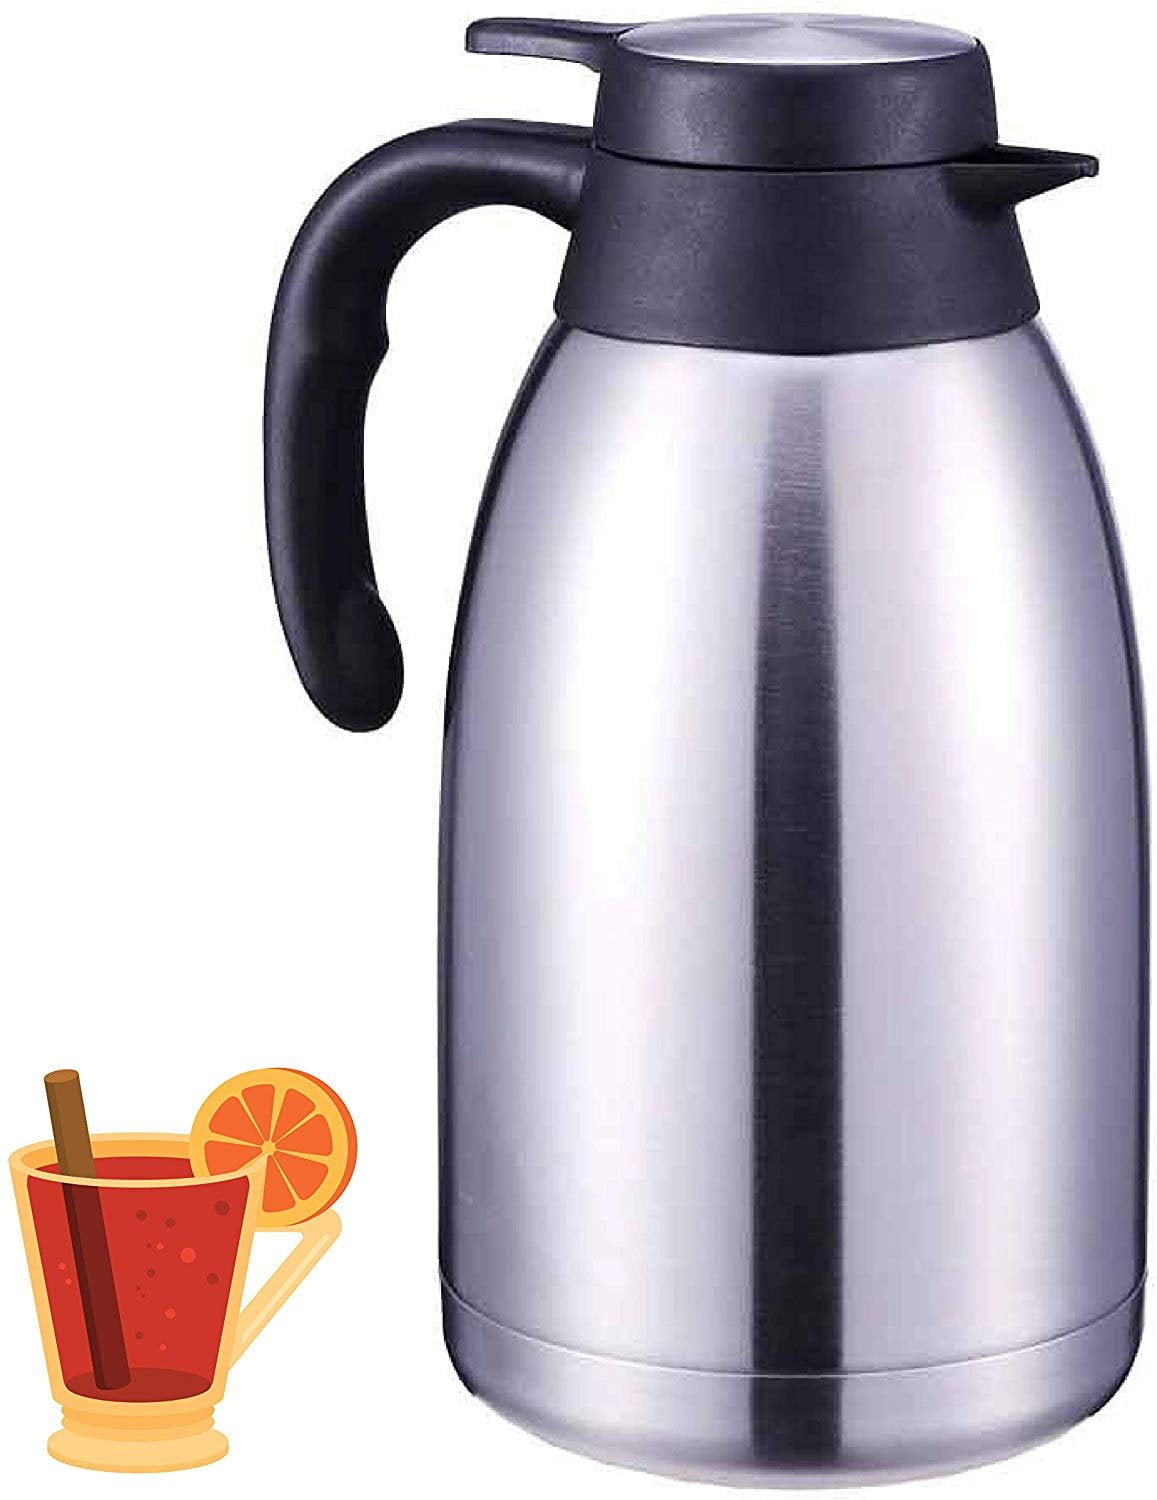 Insulated Vacuum Jug 2 Litre 304 Stainless Steel,Carafe Thermal Pitcher with Lid,Double Walled Vacuum Coffee Pot Insulated Coffee Tea Carafe,24 Hour Heat Retention Color : Gold, Size : 2L